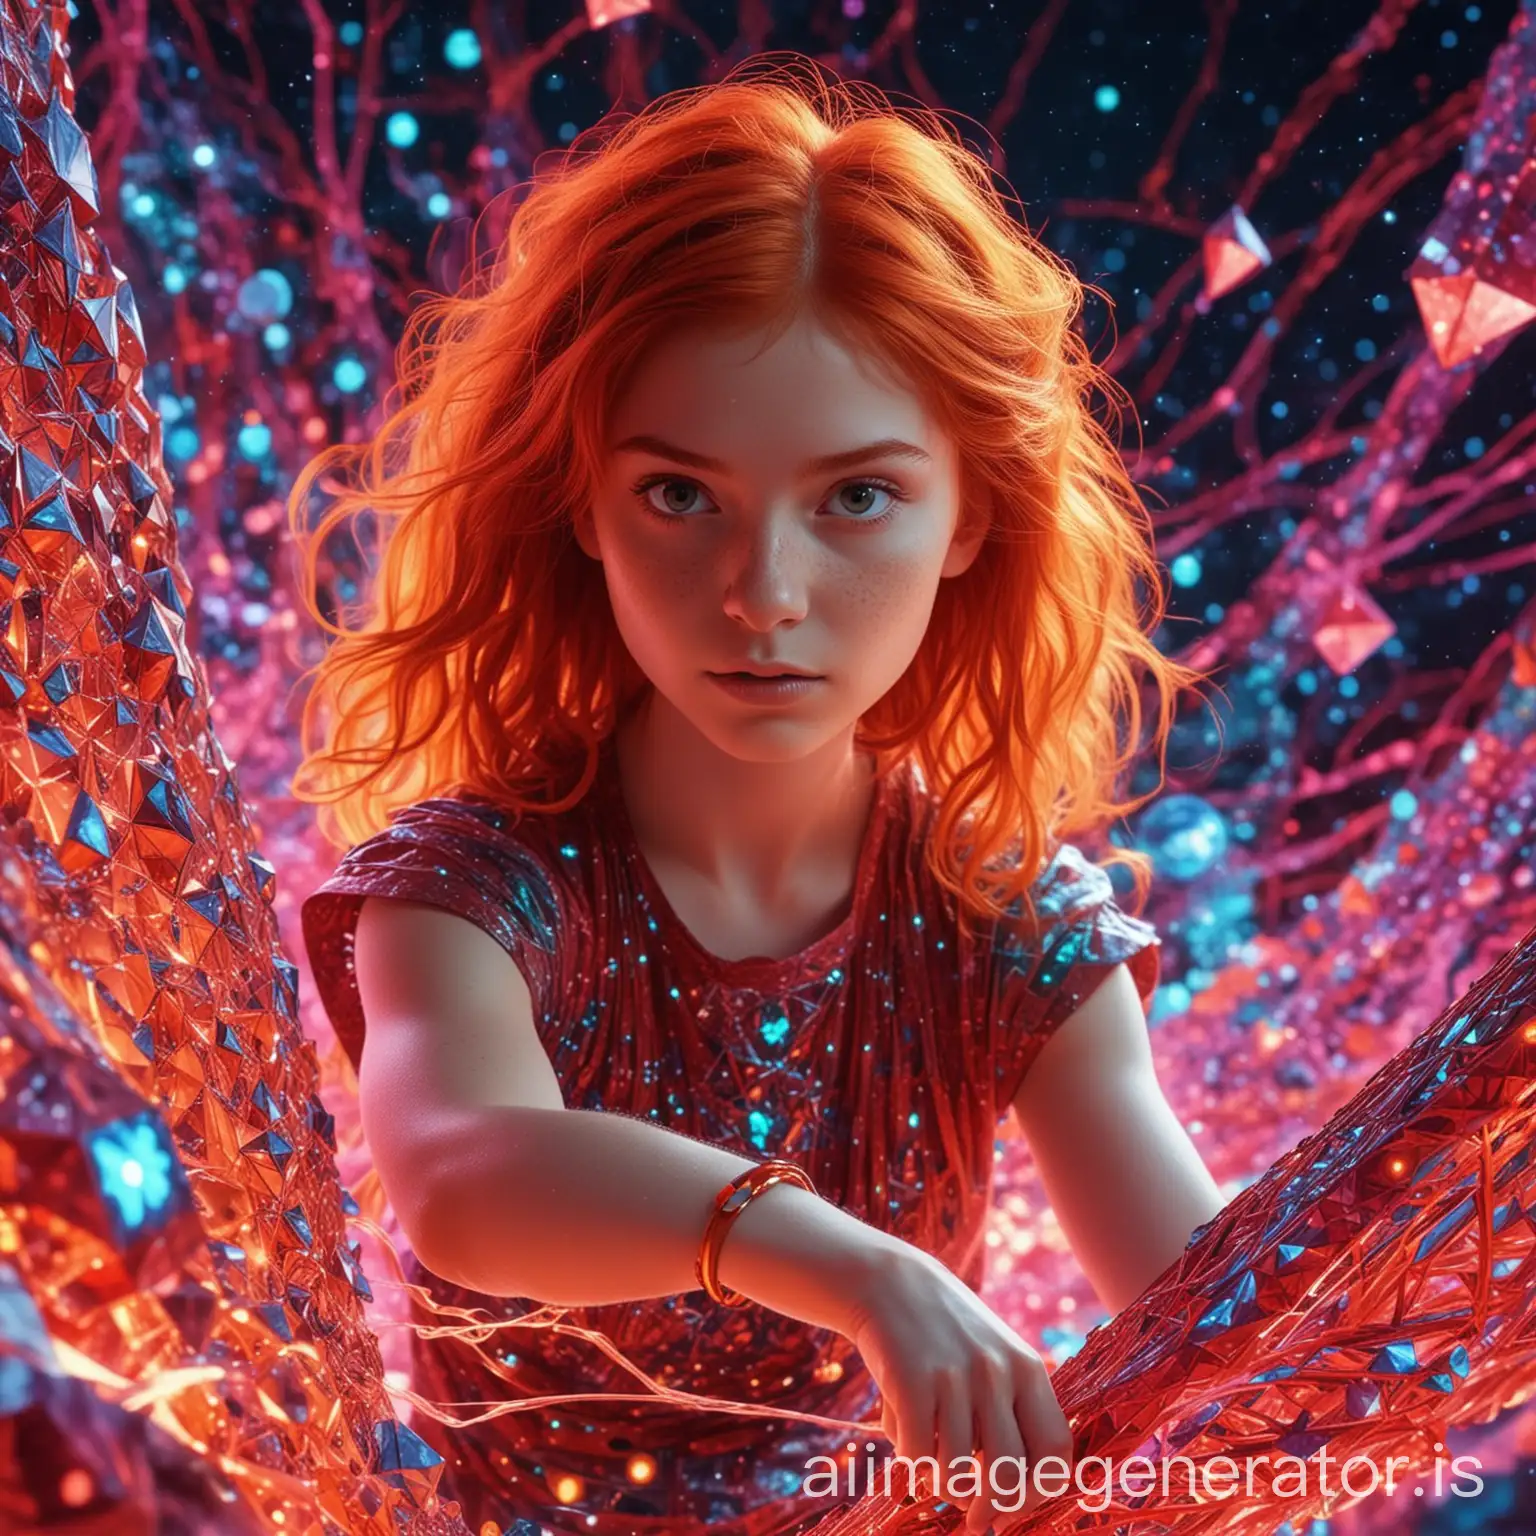 RedHaired-Girl-Playing-Sikuri-in-Psychedelic-Fractal-World